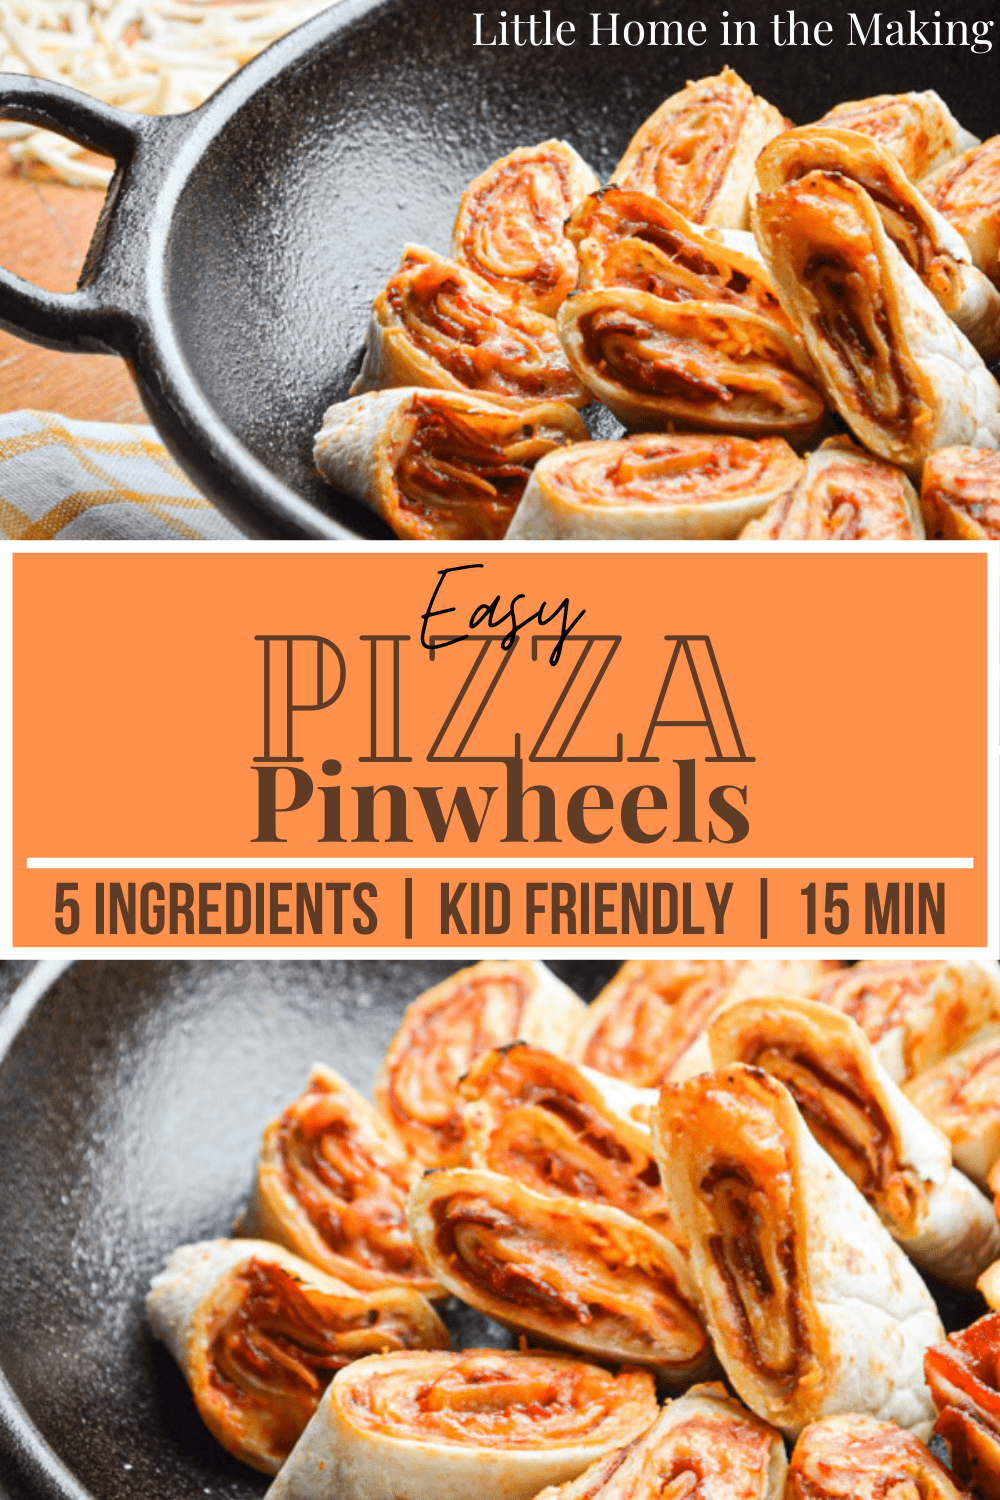 You just have to love these Easy Pizza Pinwheels! Just 5 ingredients and 20 minutes delivers a quick lunch or an appetizer to accompany a fun meal. Kid friendly too!